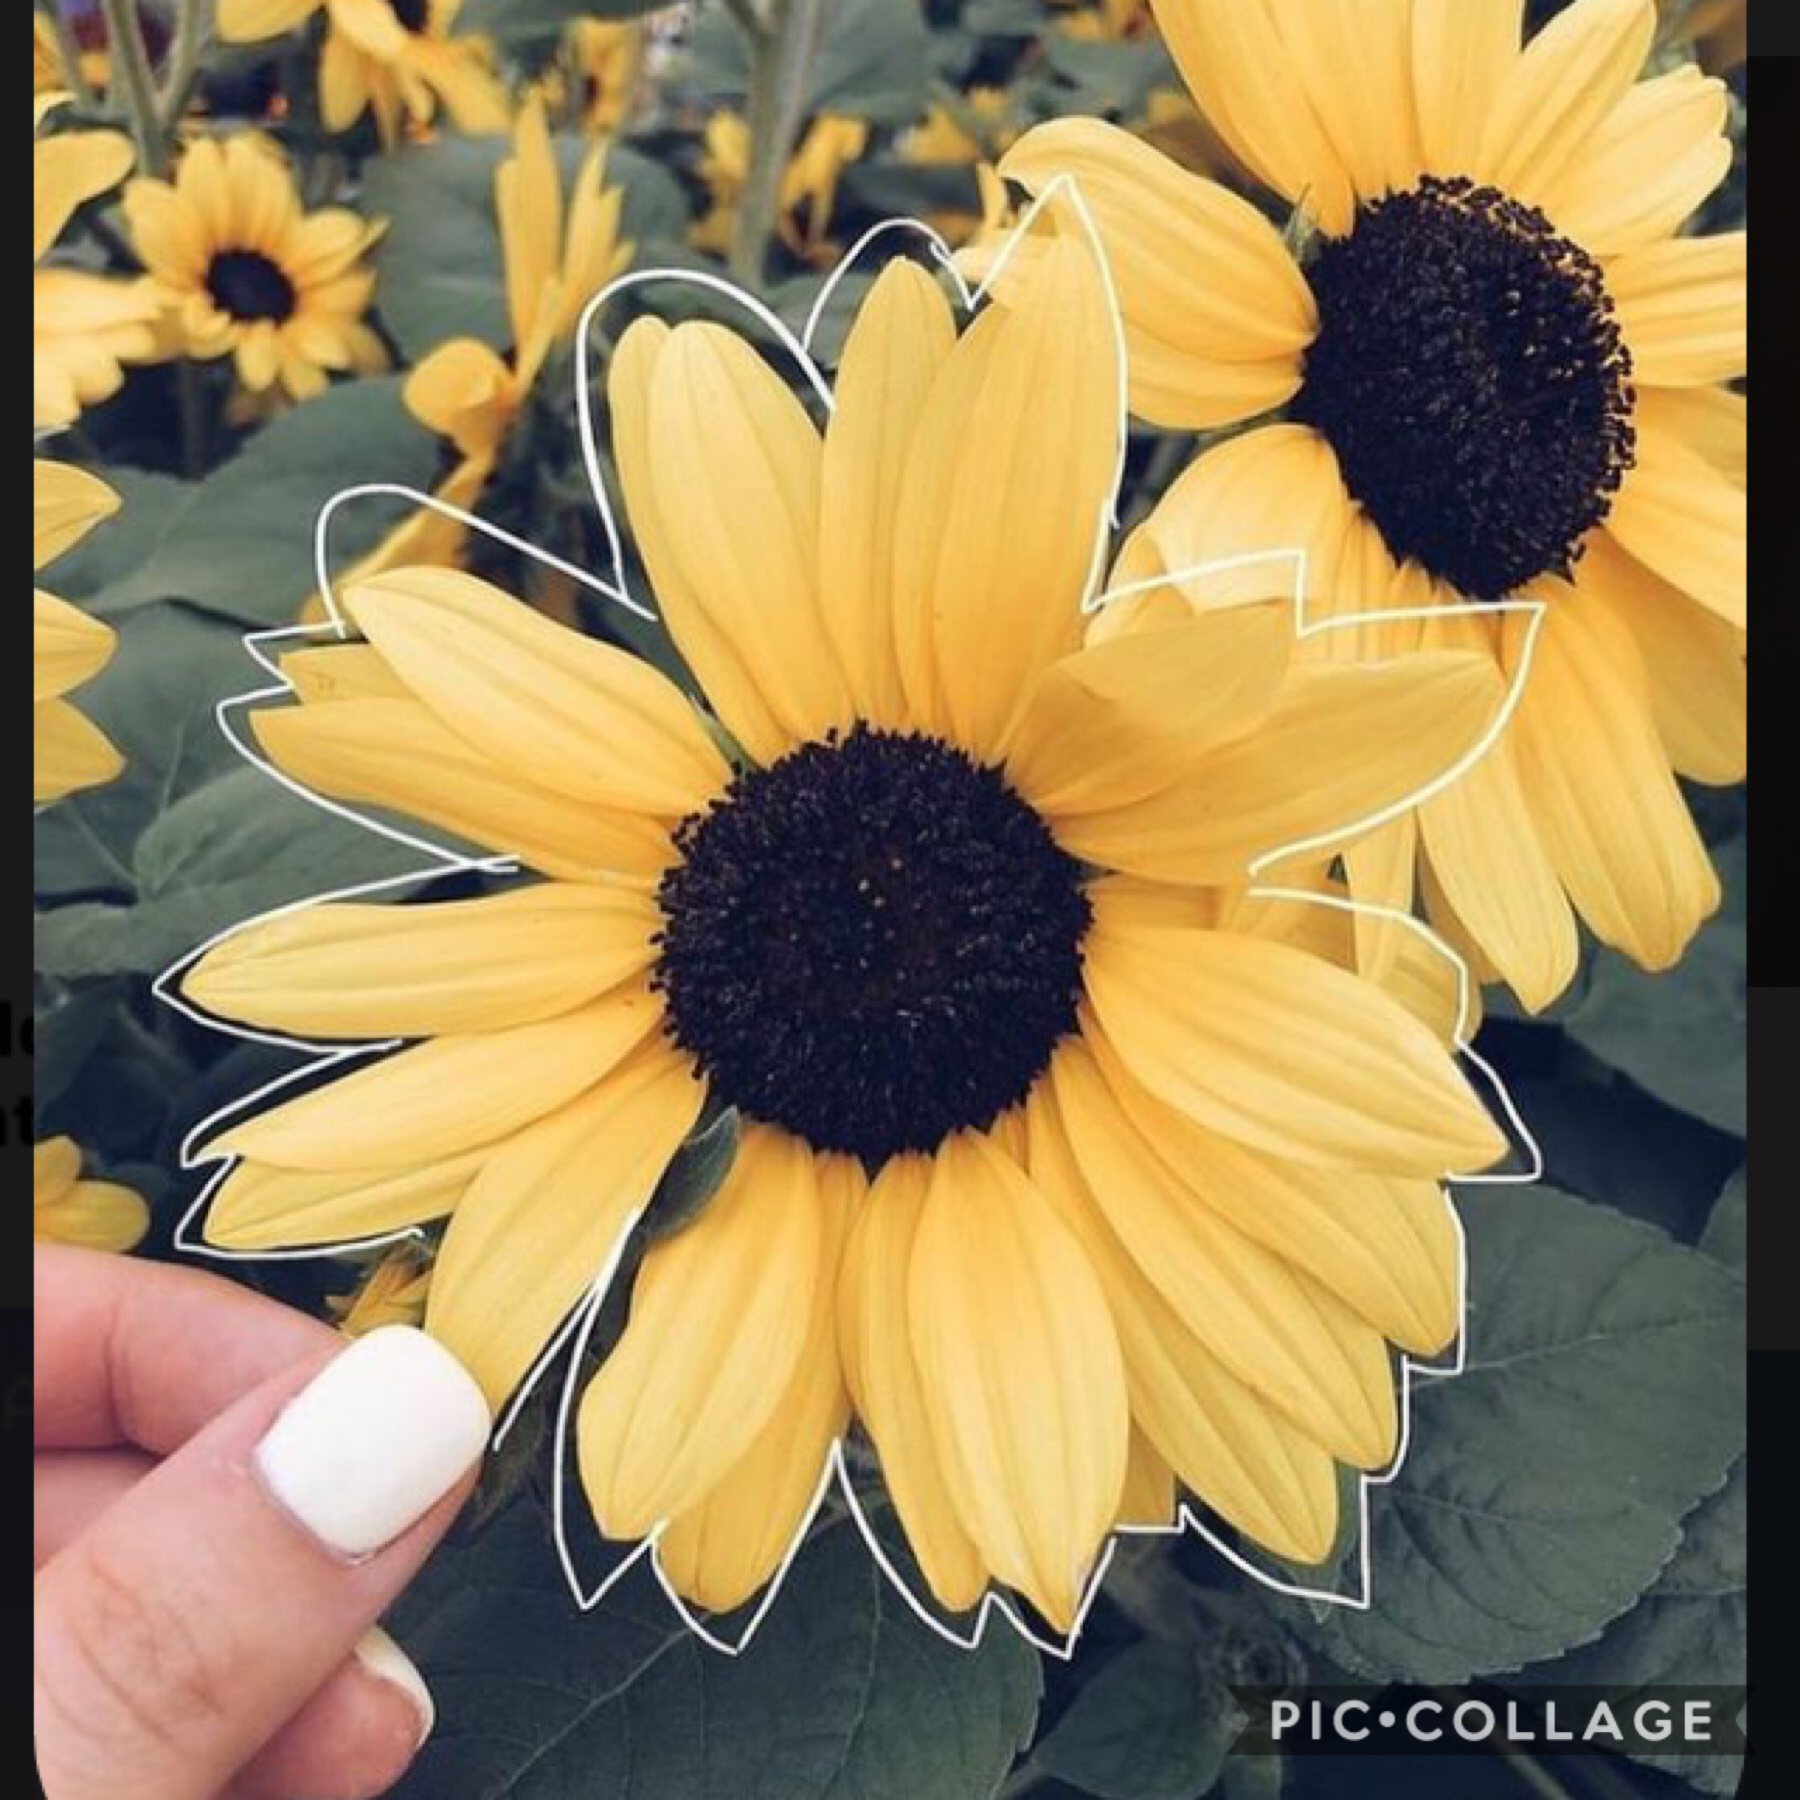 be the SUNflower in someone’s life❤️❤️🌼🌼
~sunflowereditsss